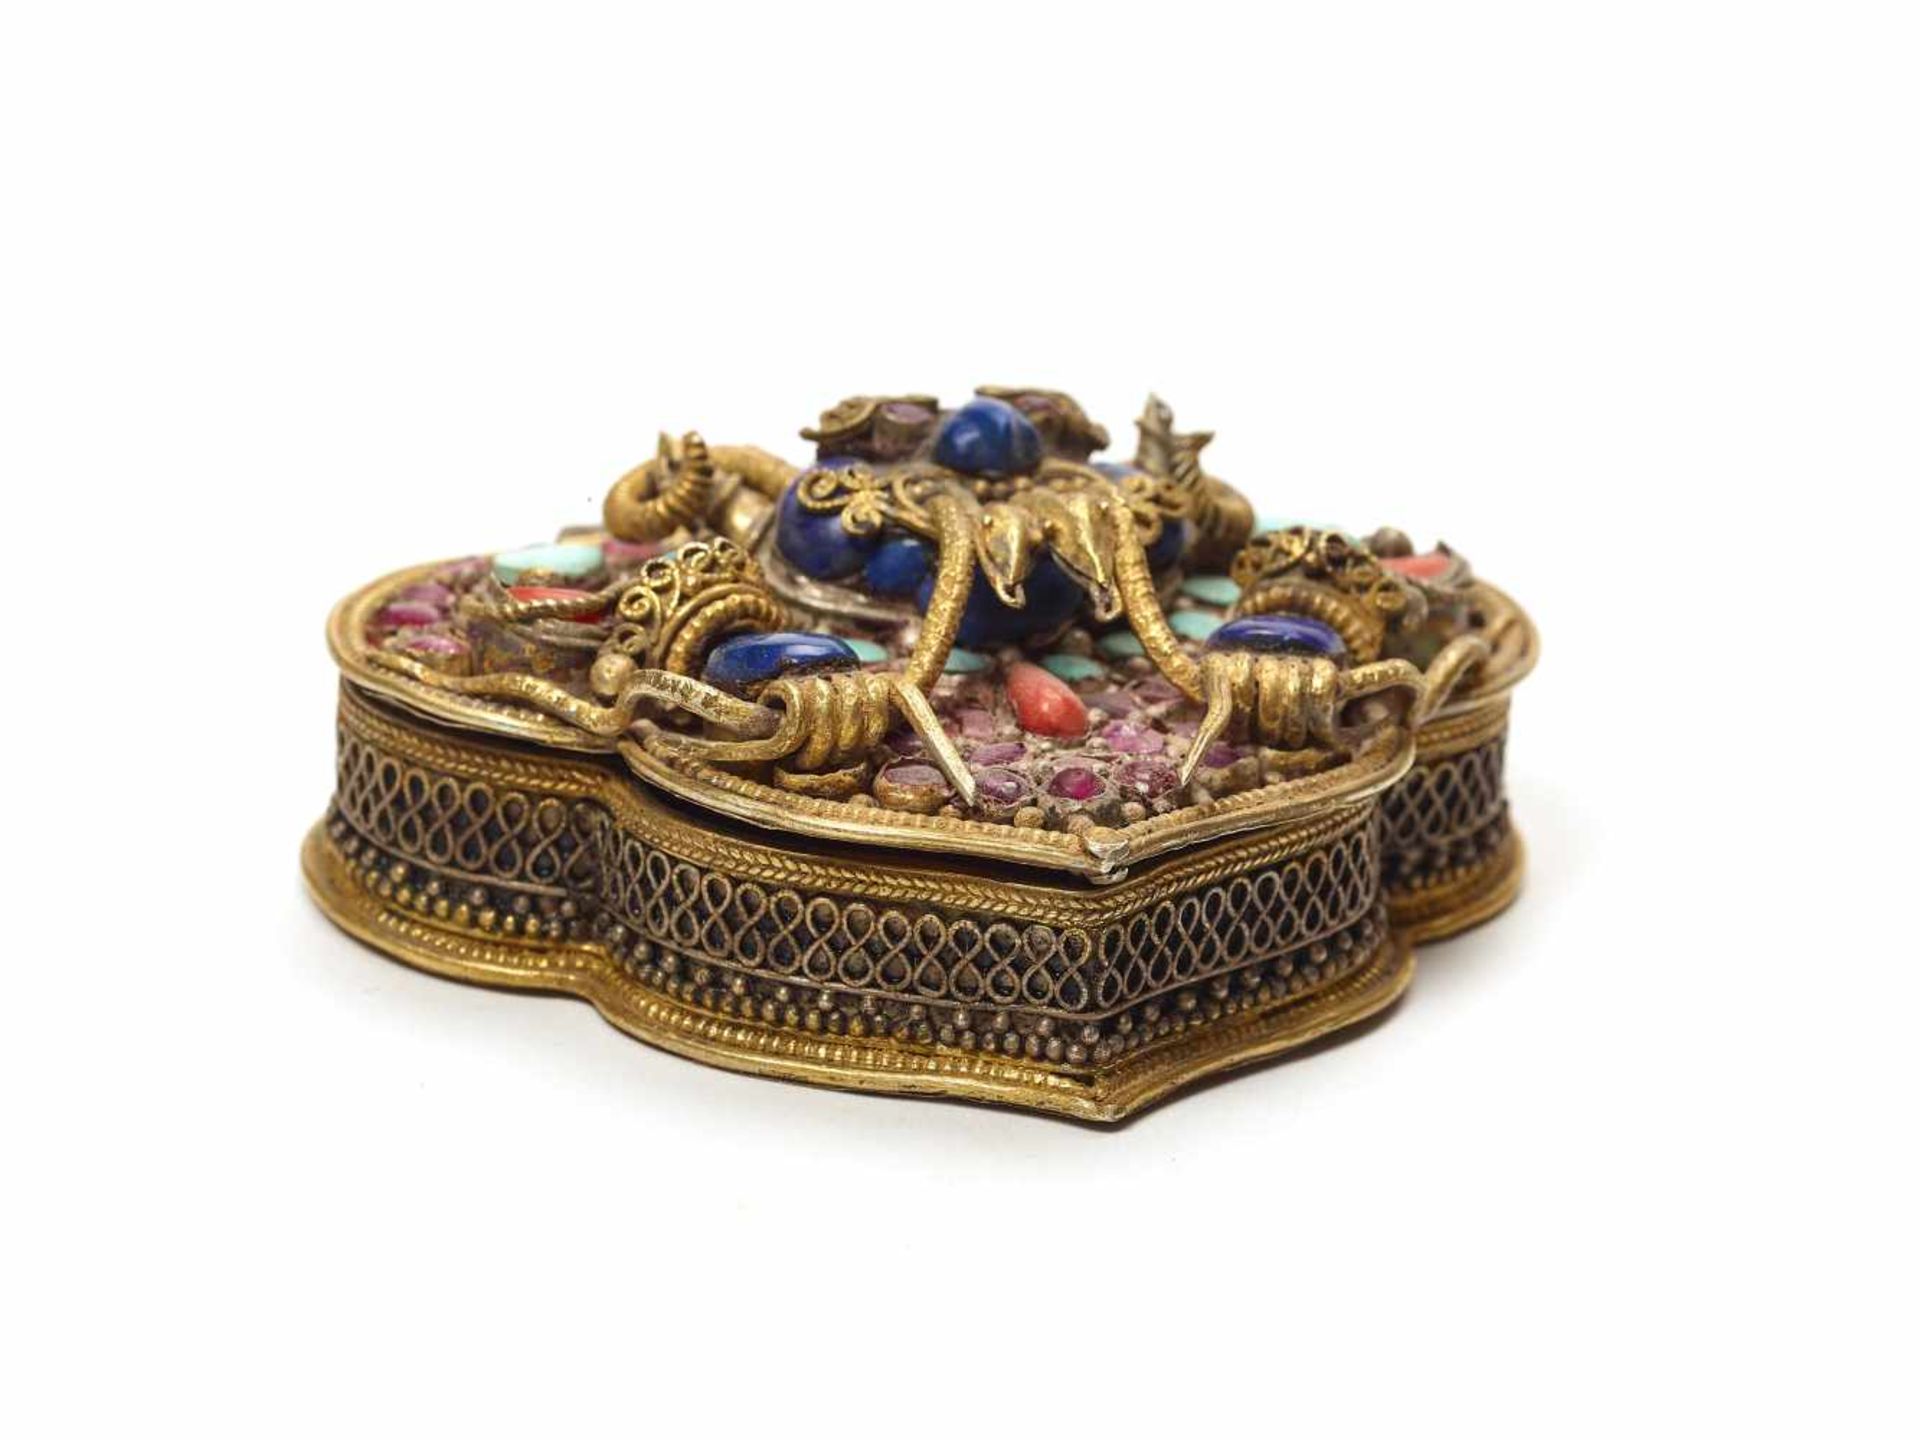 A RARE AND ORNATE GAU WITH BUDDHA AMITAYUSSilver with gilding, turquoise, lapis lazuli, rubies, - Image 4 of 6